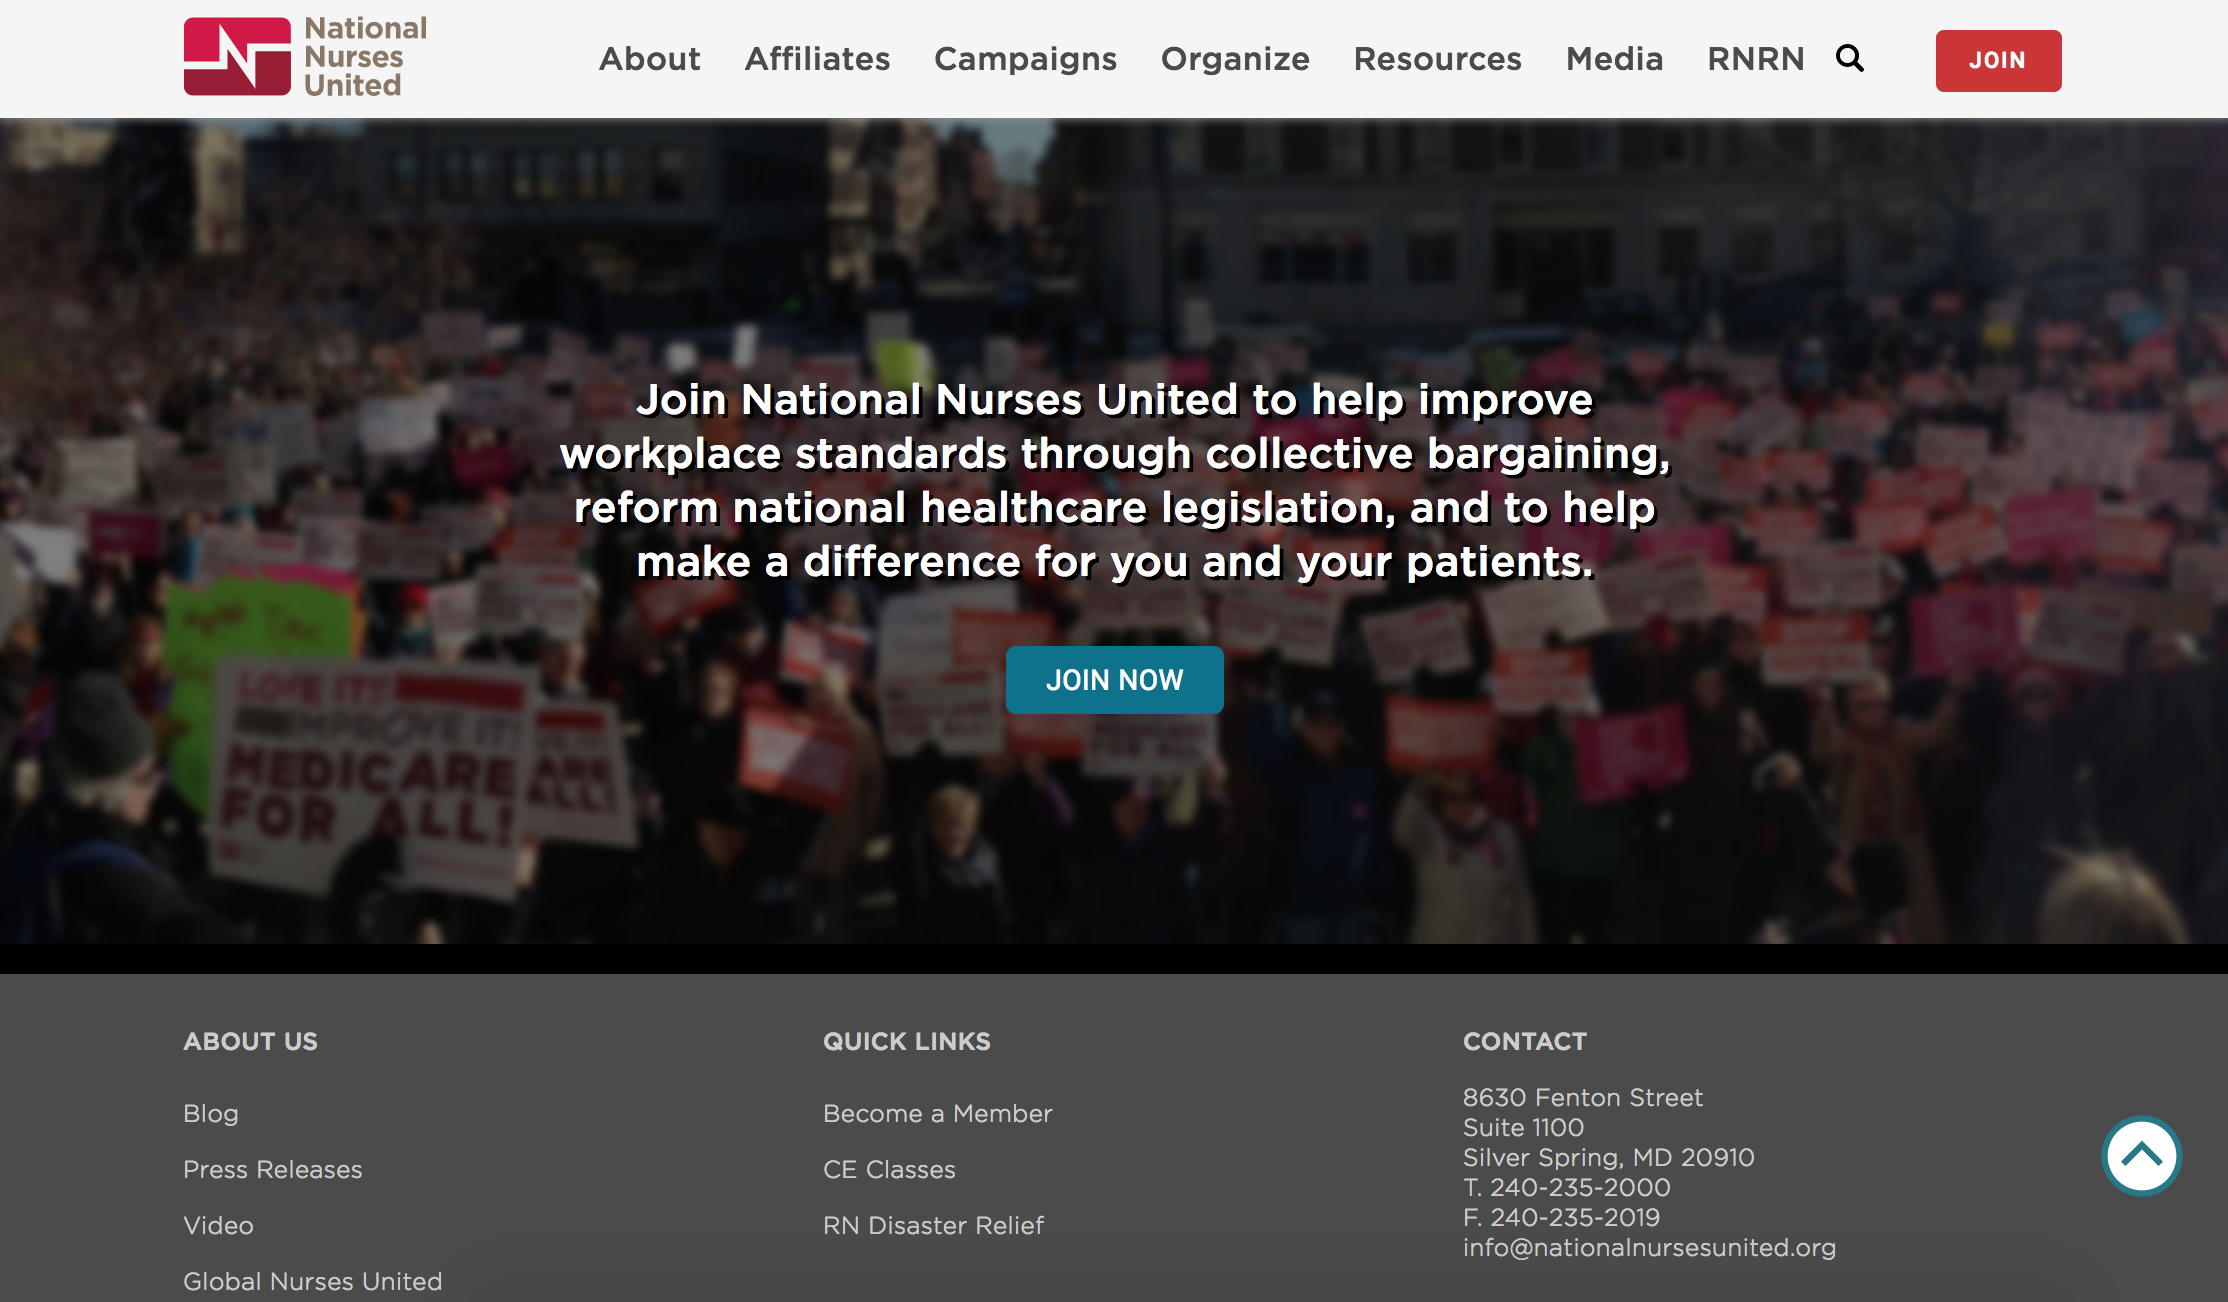 footer design of the nnu homepage with a prominent join now call to action item